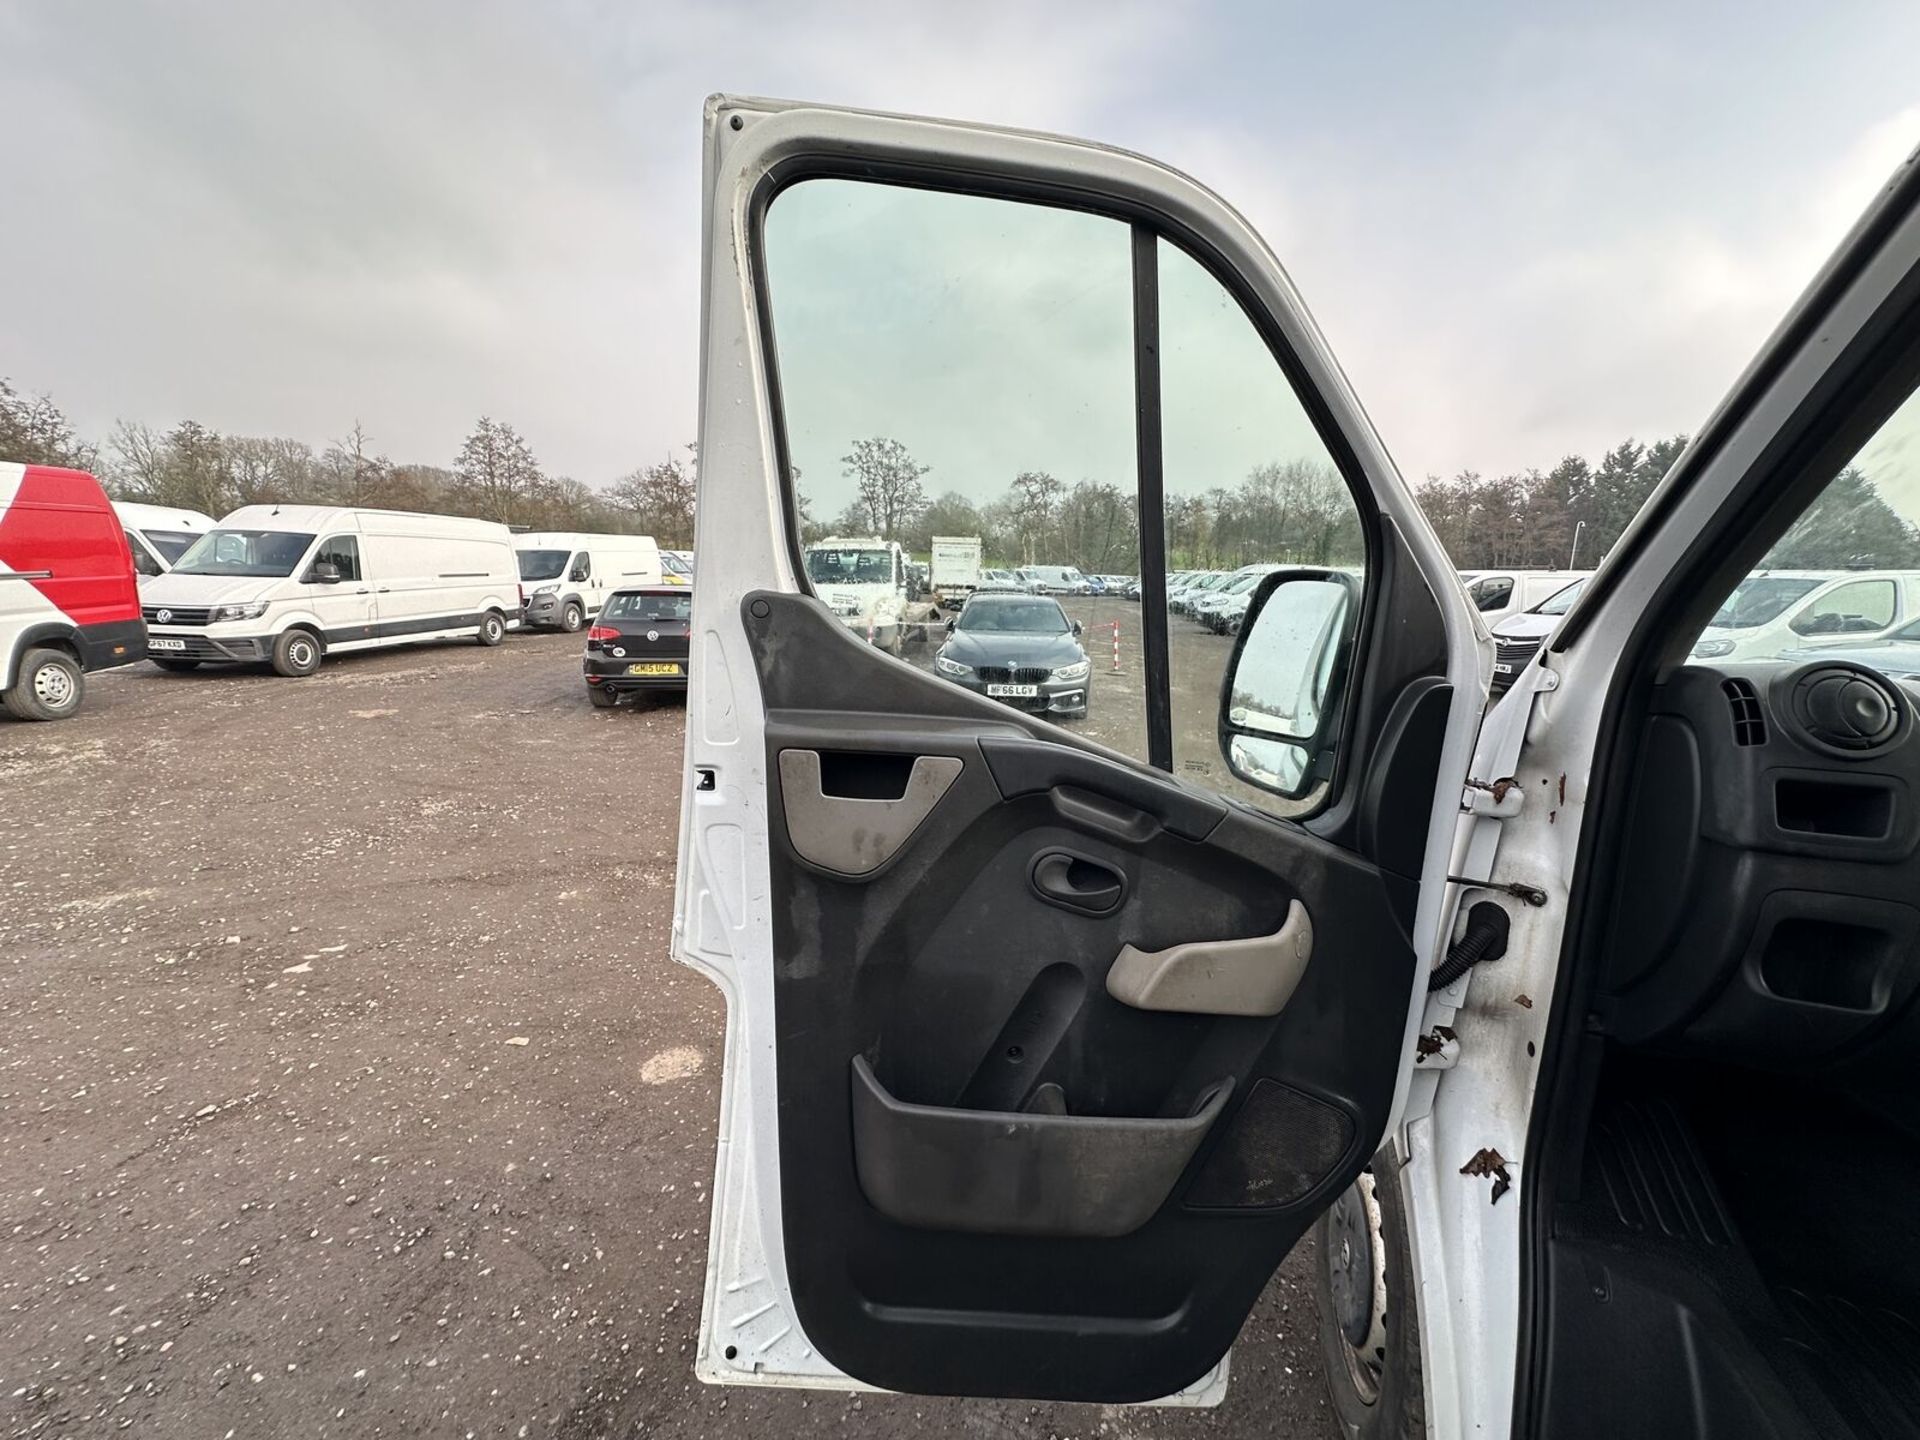 TRUSTY TRANSPORTER: 2015 VAUXHALL MOVANO - BUILT FOR BUSINESS - Image 5 of 20